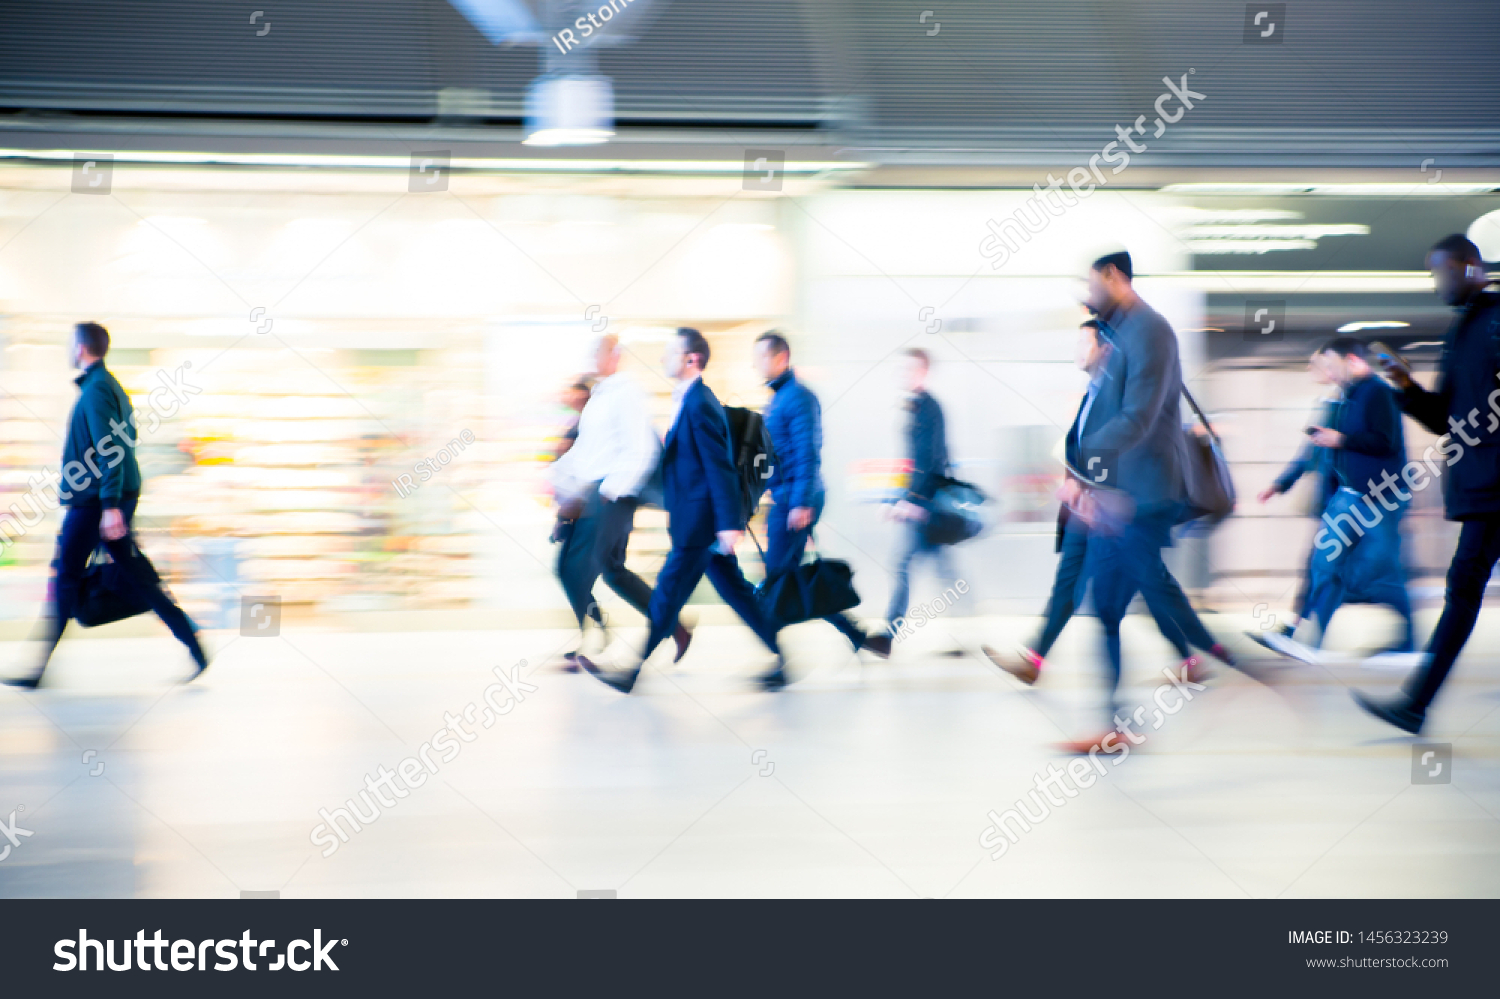 Beautiful motion blur of walking people. Early morning rush hours, busy modern life concept. Ideal for websites and magazines layouts #1456323239